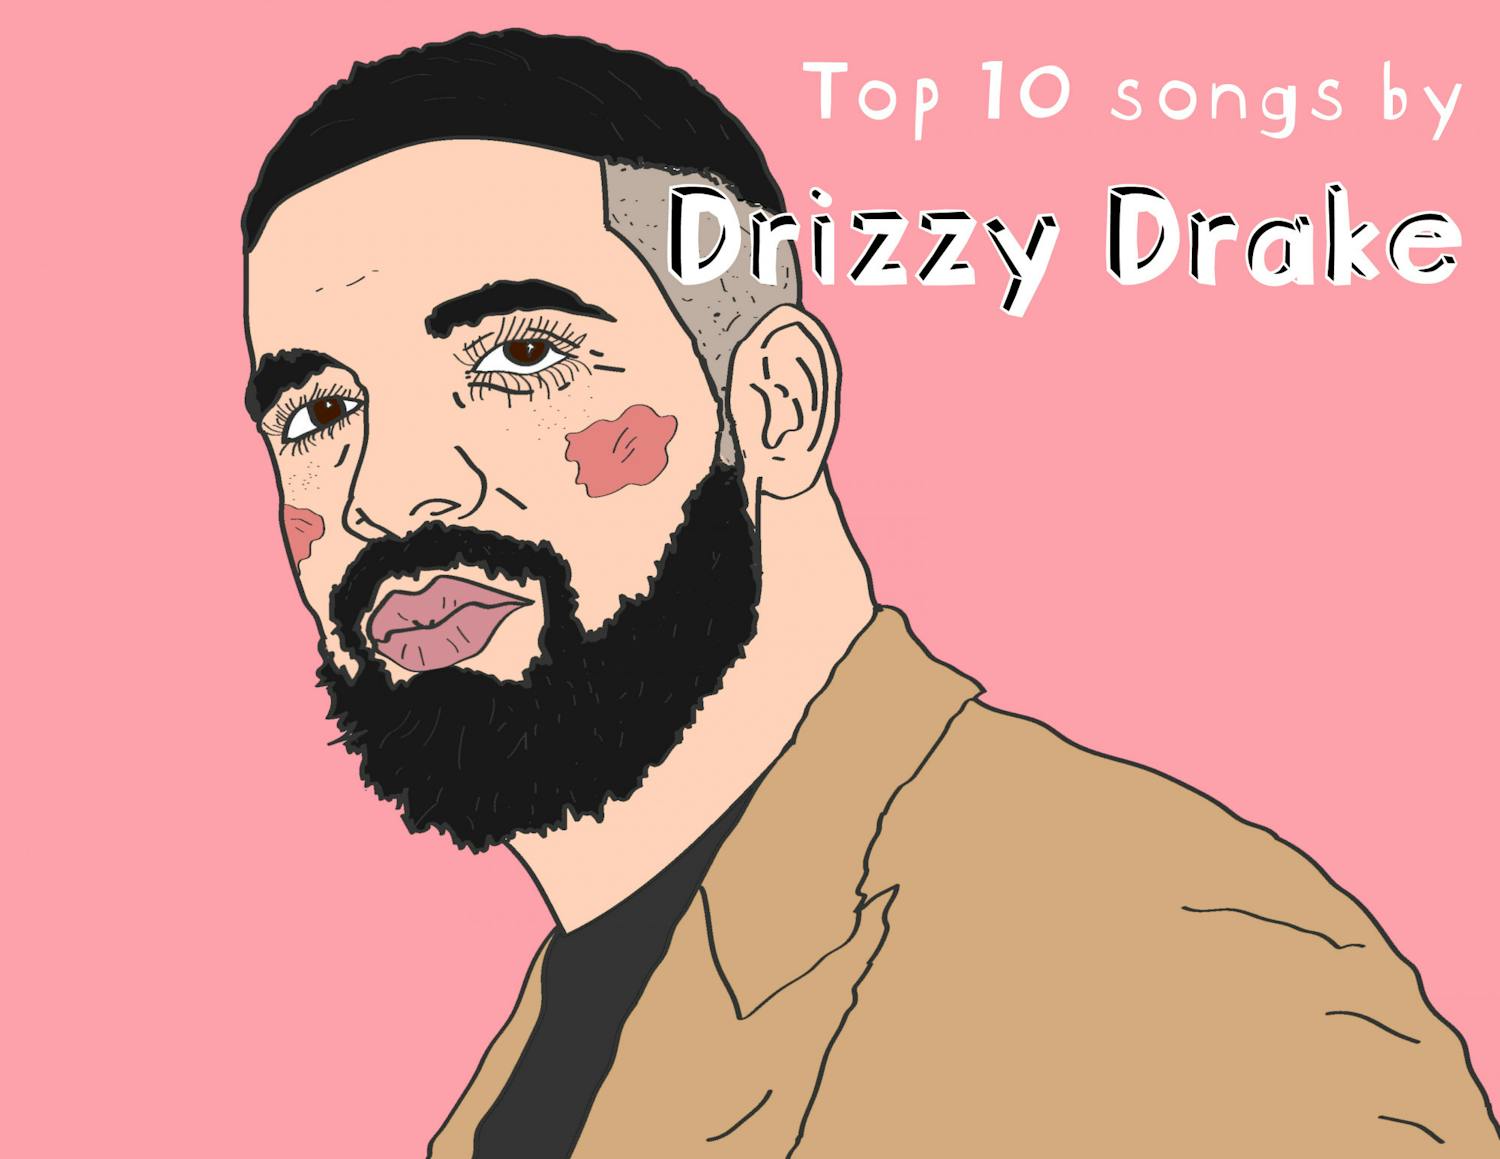 ægteskab Adelaide maskine Here's Drake's top 10 songs of all time, ranked - The Post